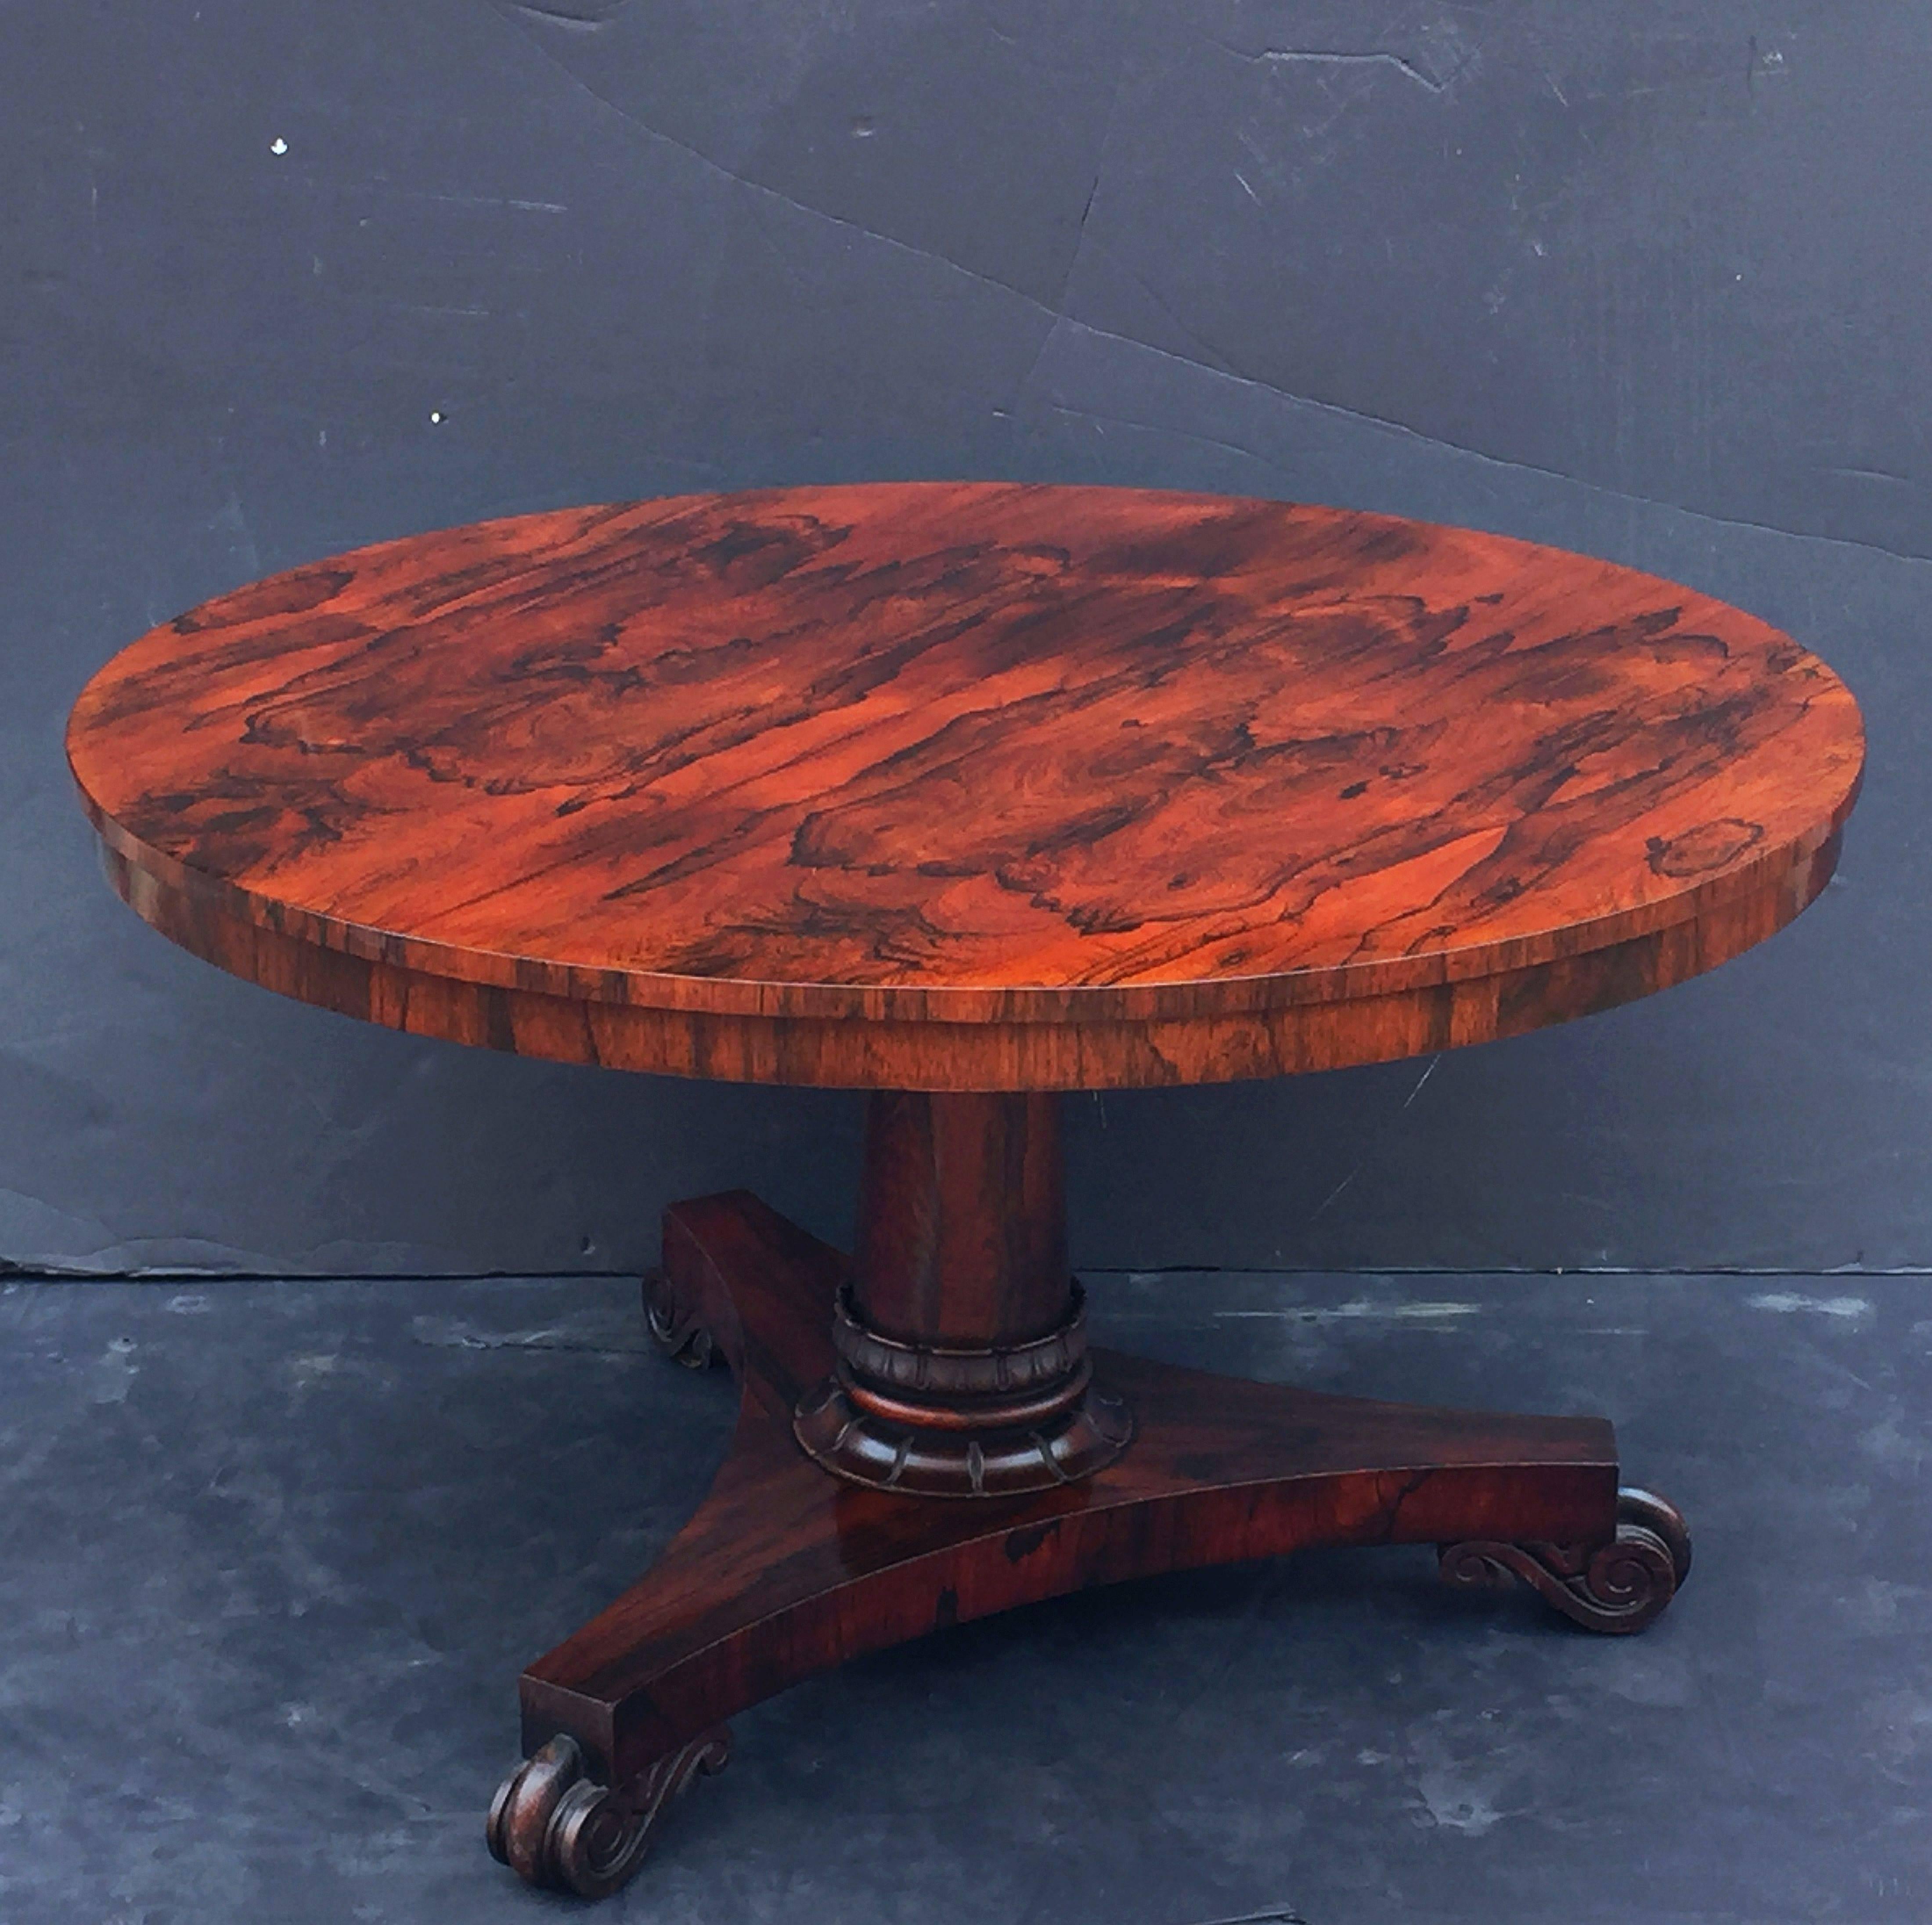 A fine English round centre table of rosewood from the William IV period, featuring a veneered top of figured rosewood.
Set upon a column pedestal and triform base, resting on scrolled feet, on rolling brass casters.
A Classic tilt-top with hinged